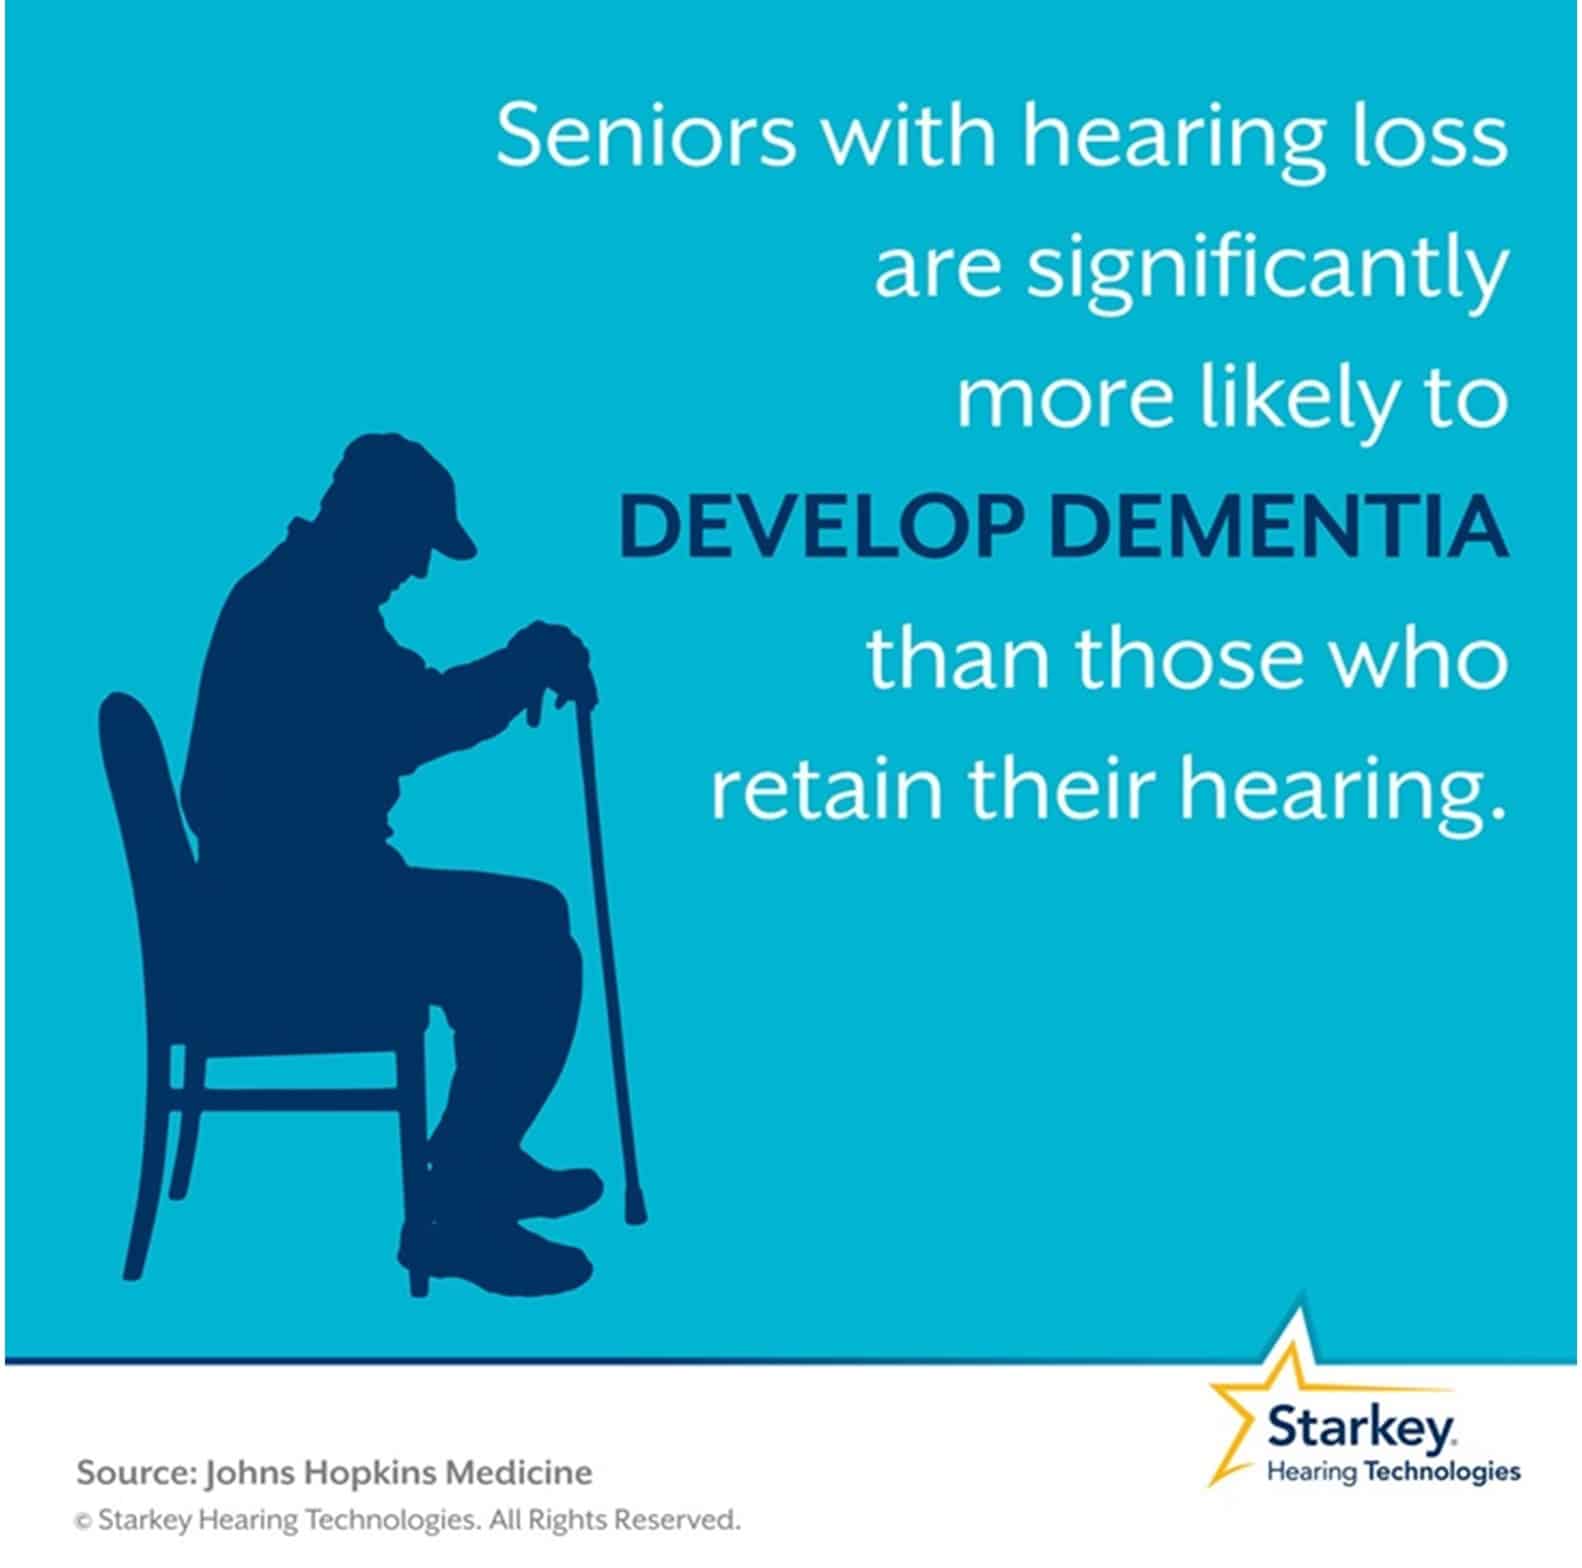 The link between dementia and hearing loss